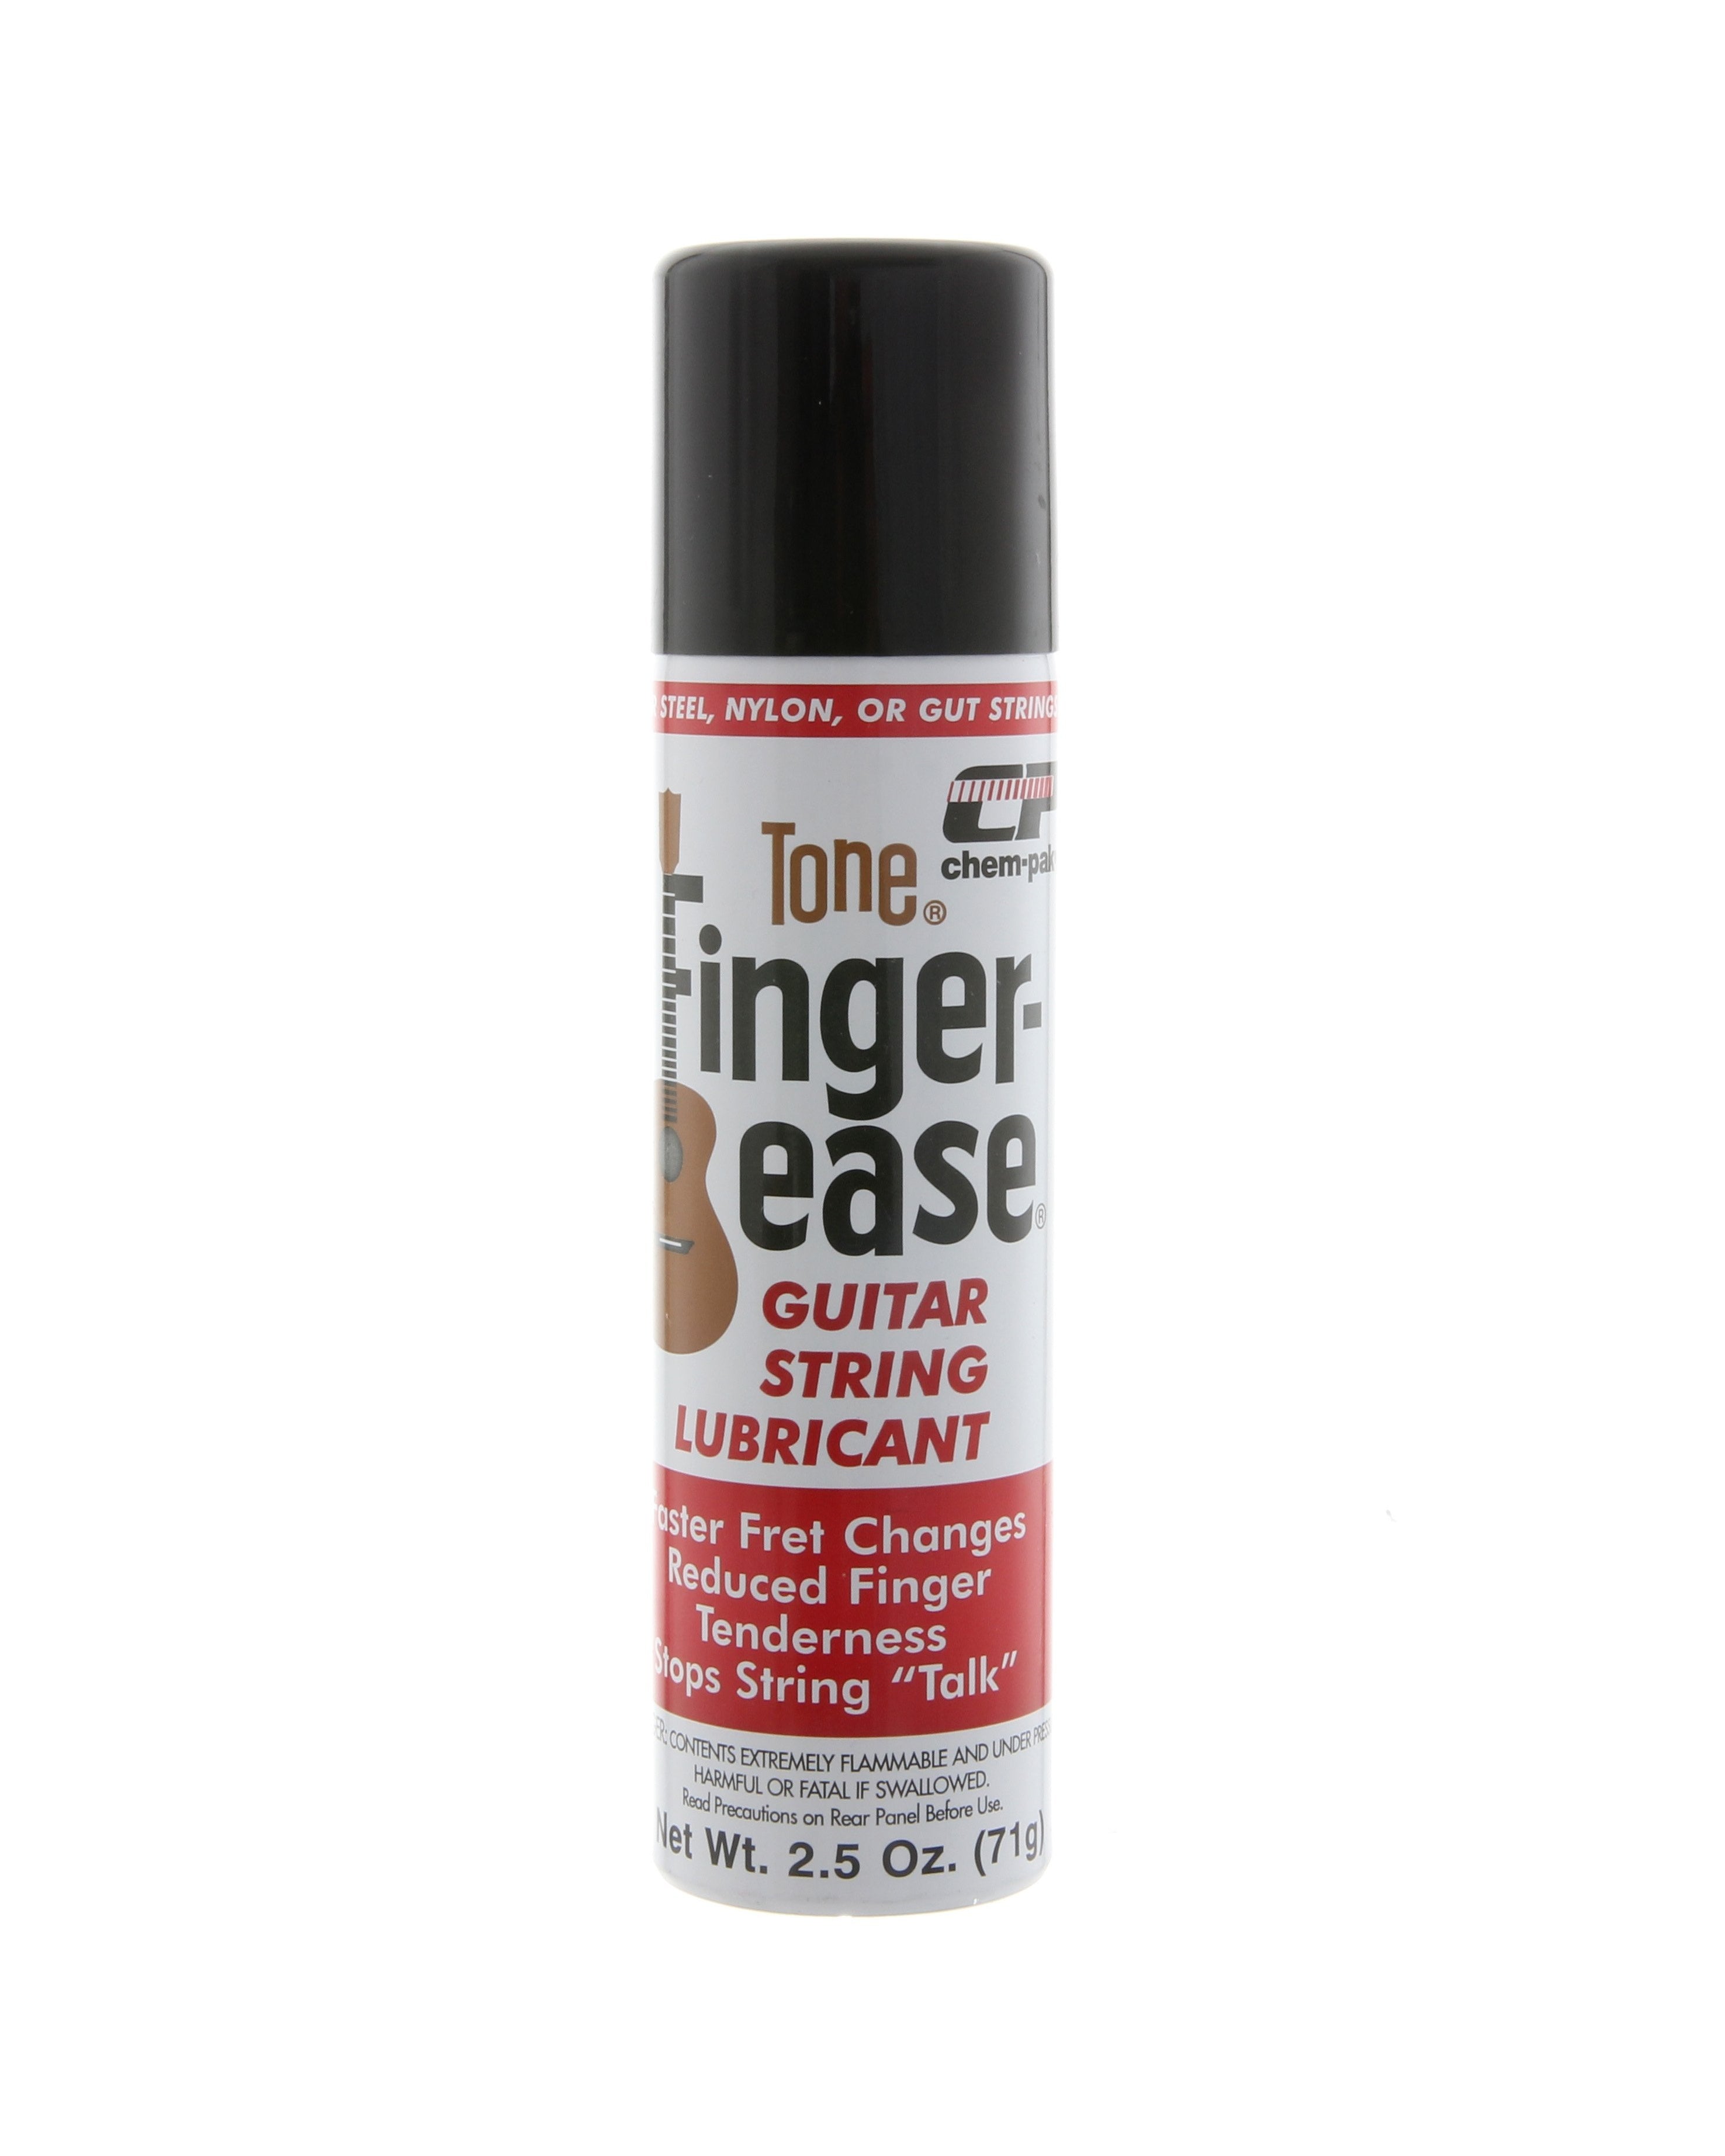 What household item can I use in place of guitar string lube? - Quora